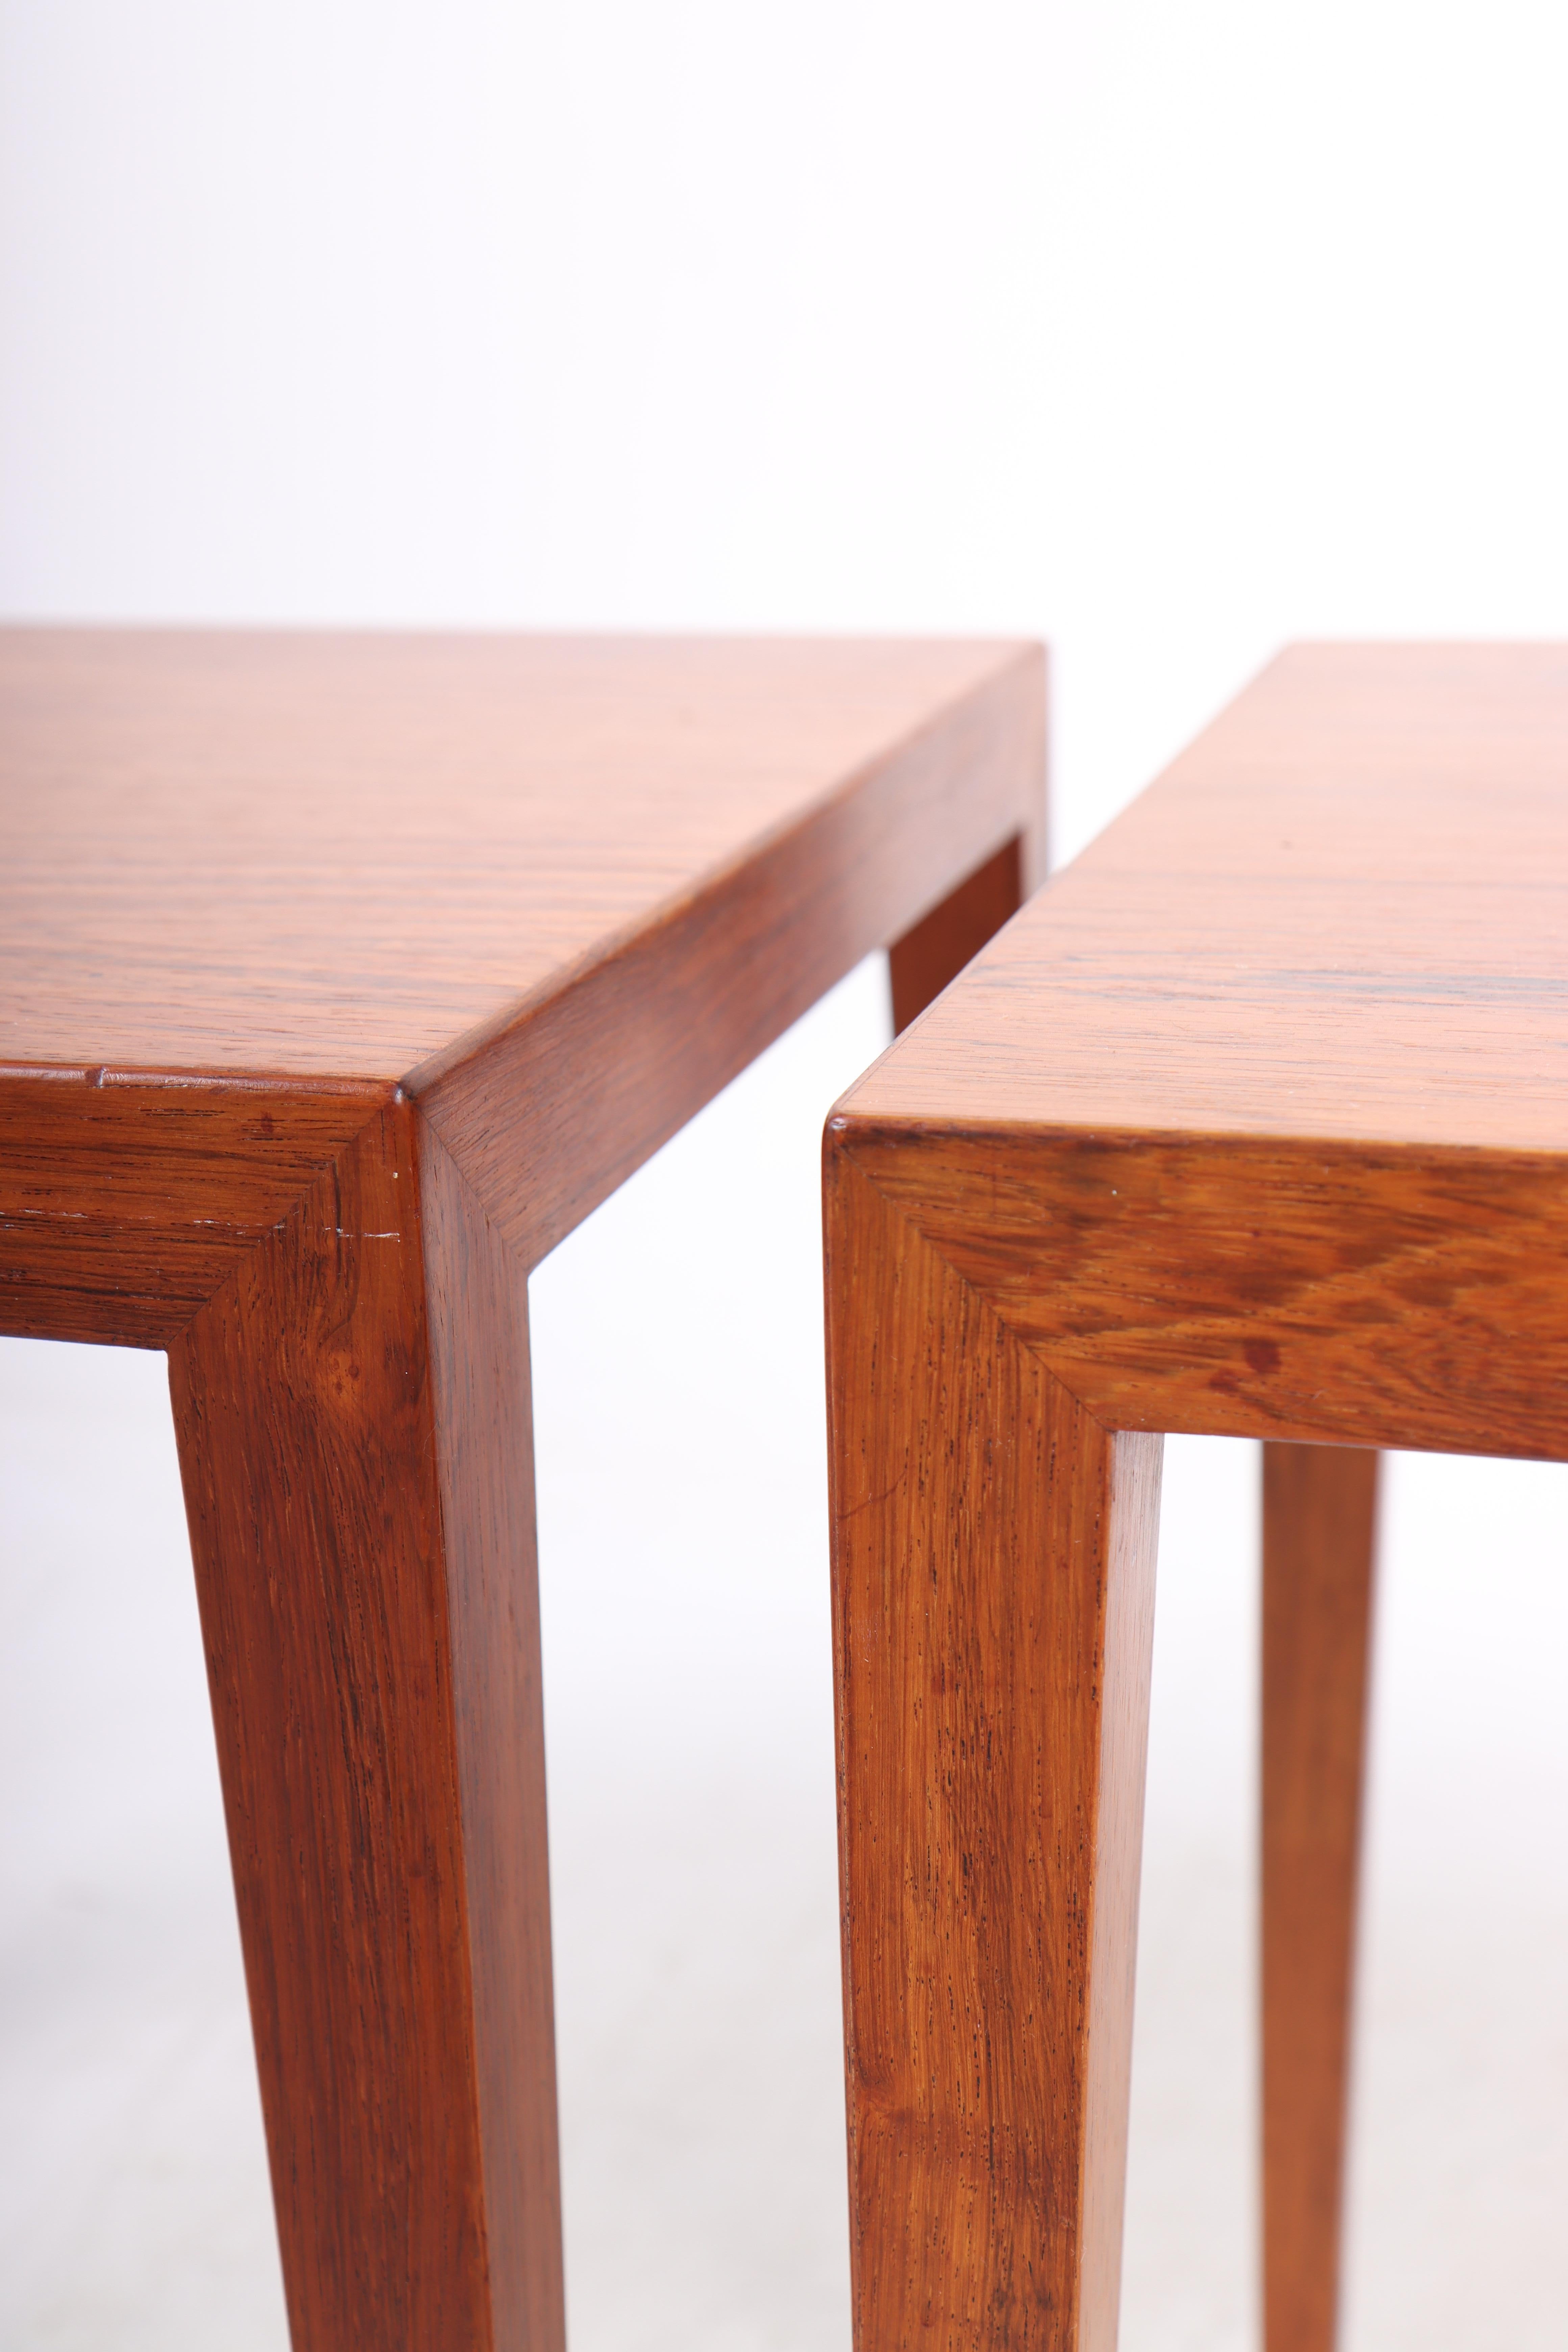 Scandinavian Modern Pair of Midcentury Side Tables in Rosewood by Haslev, Danish Design, 1960s For Sale